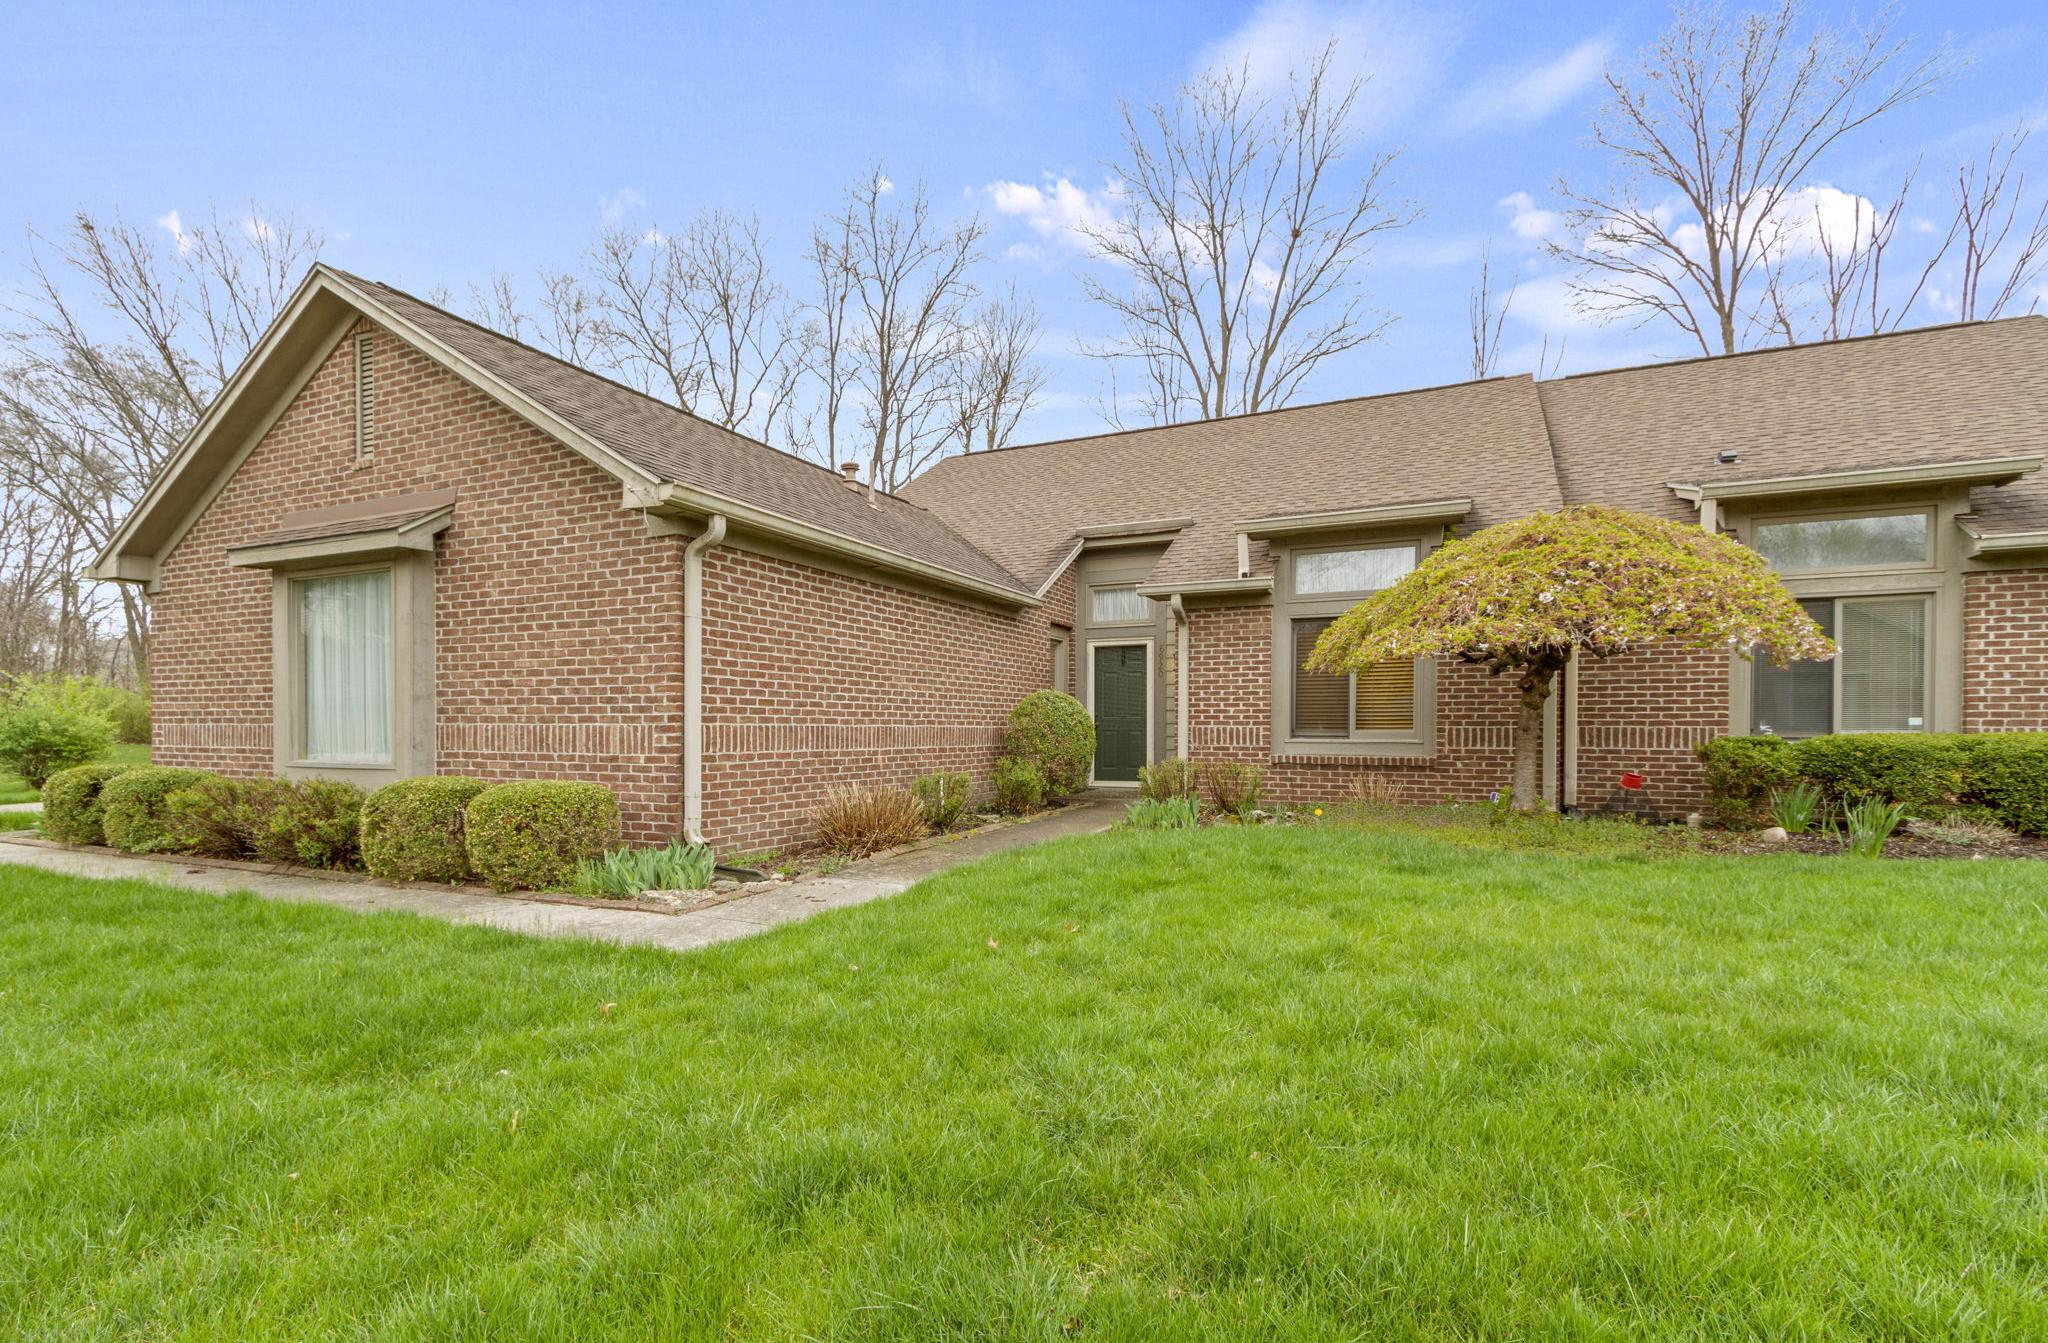 Photo one of 8920 Pennwood Ct Indianapolis IN 46240 | MLS 21972061